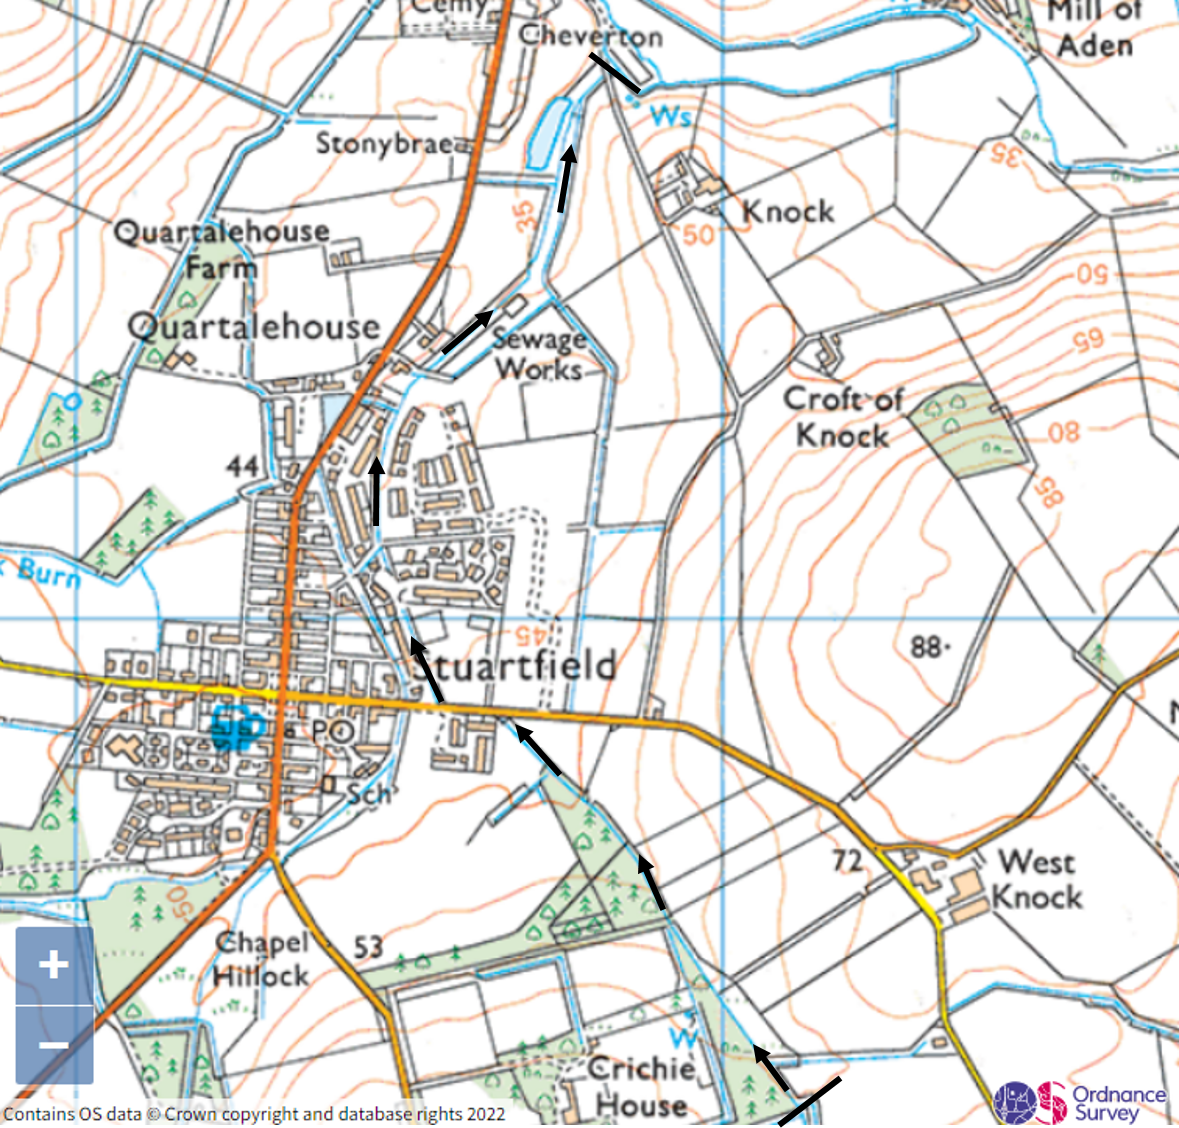 Map of Stuartfield burn and village showing limits of treatment sites